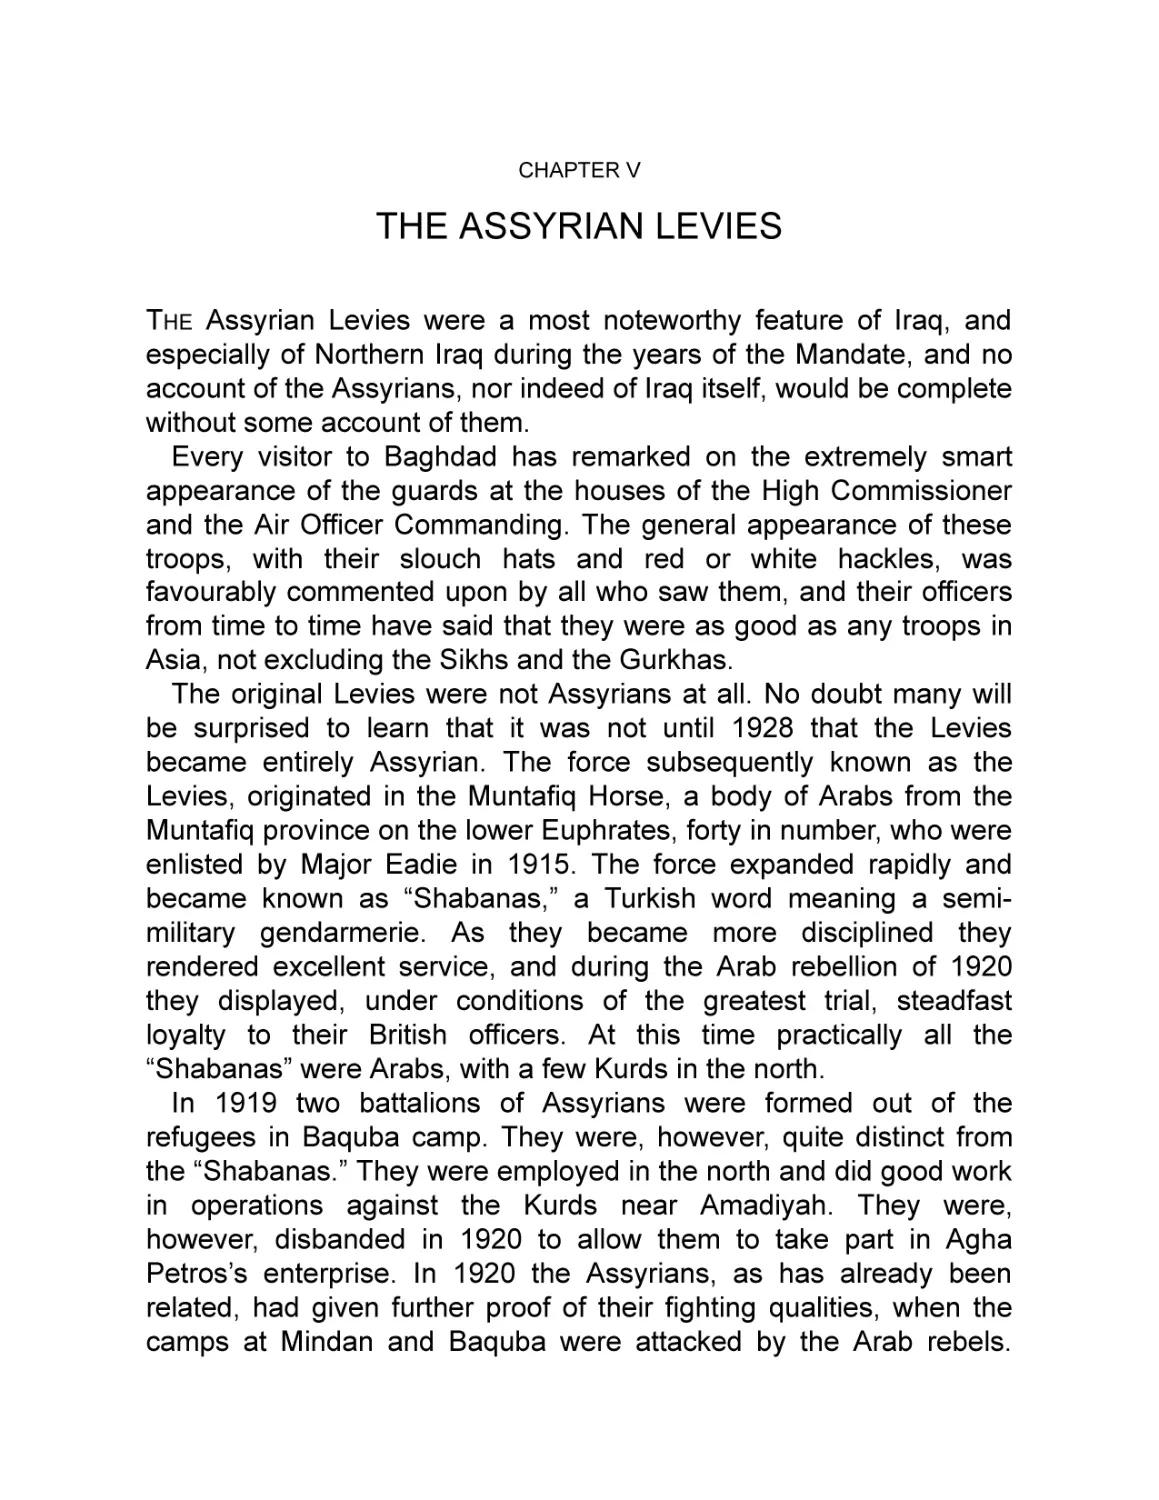 V The Assyrian Levies